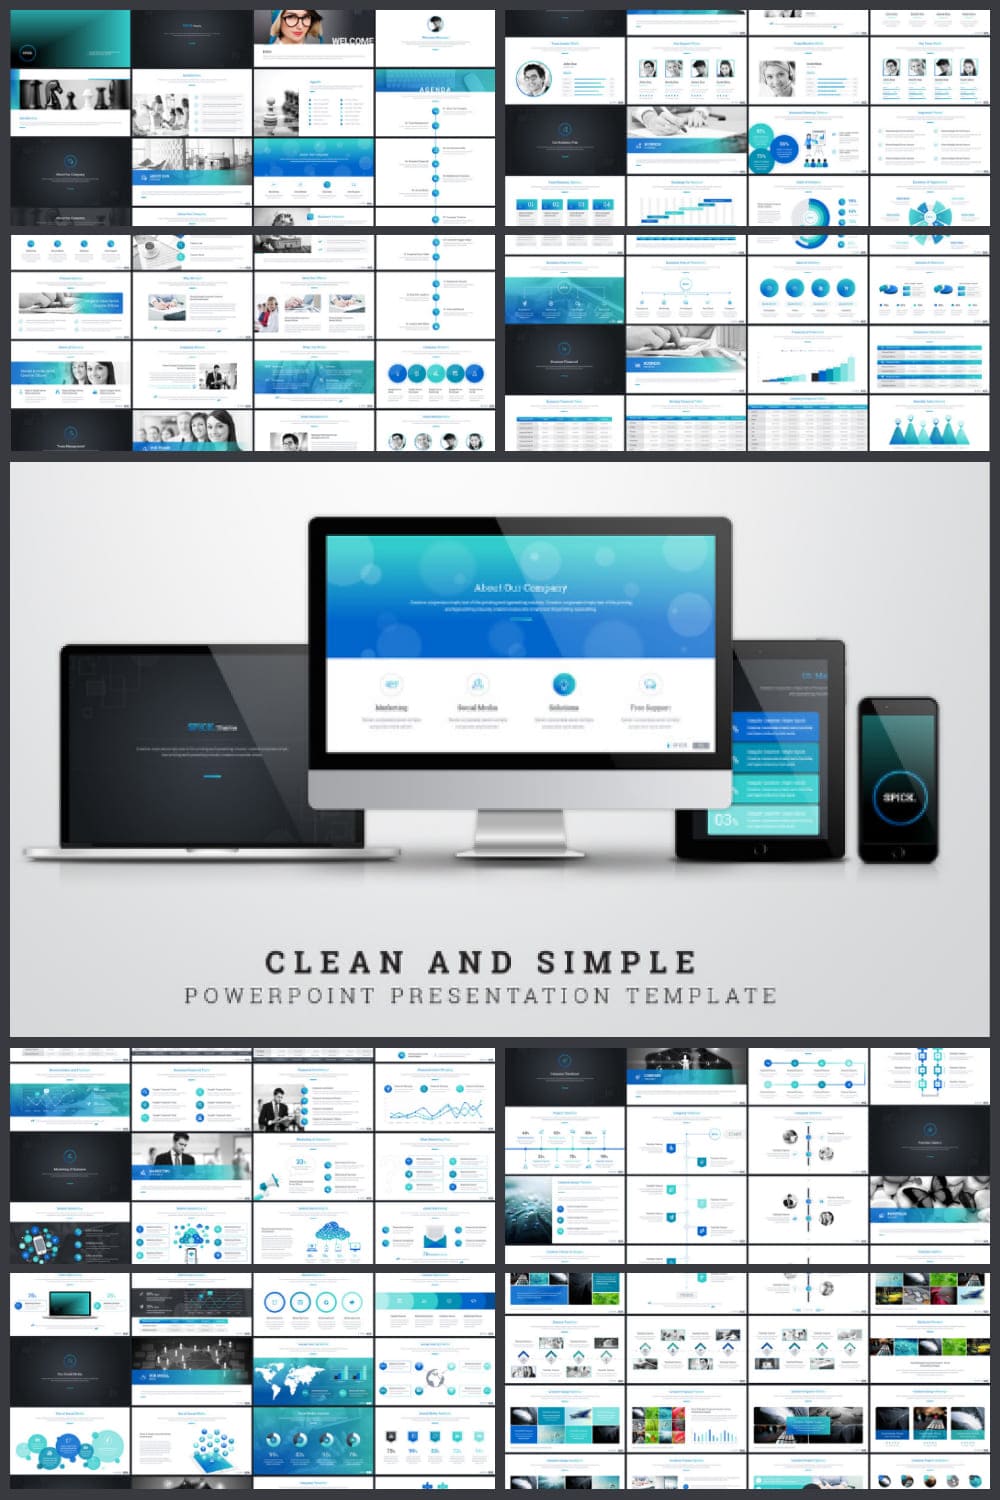 Clean and simple presentation PowerPoint Template Collage image.